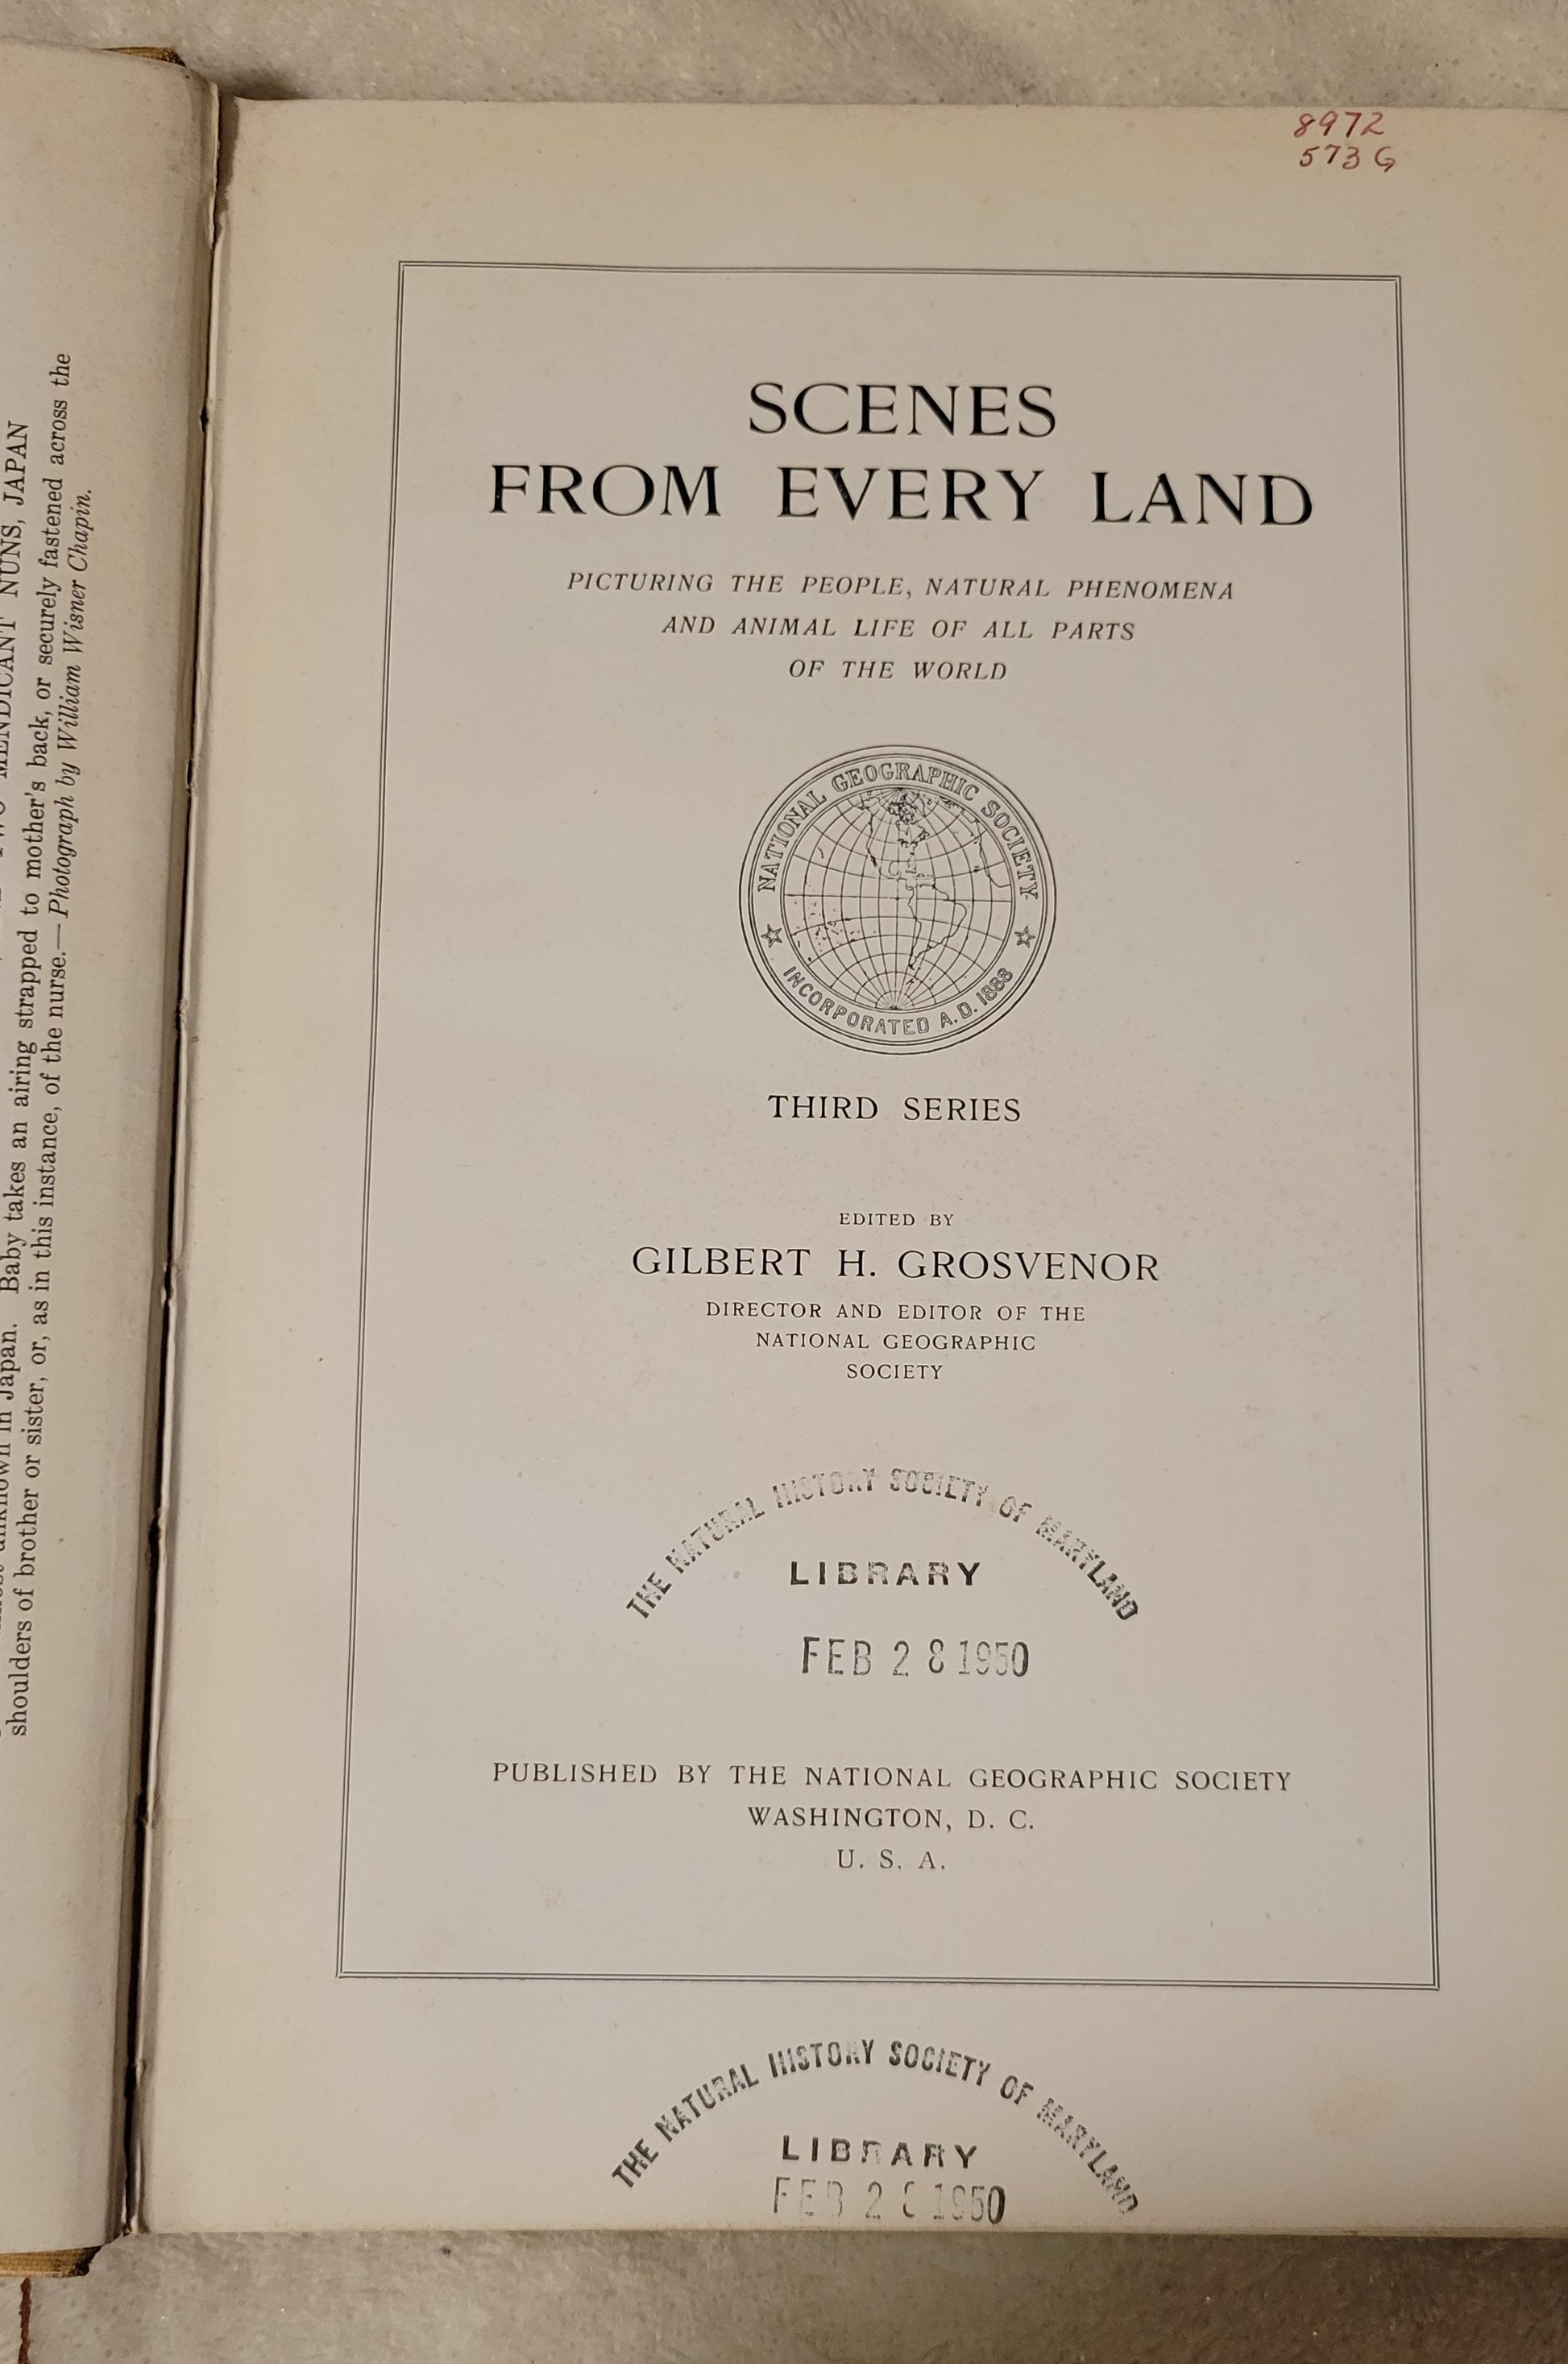 Antique book for sale National Geographic’s "Scenes from Every Land" by Gilbert H. Grosvenor. Title page.